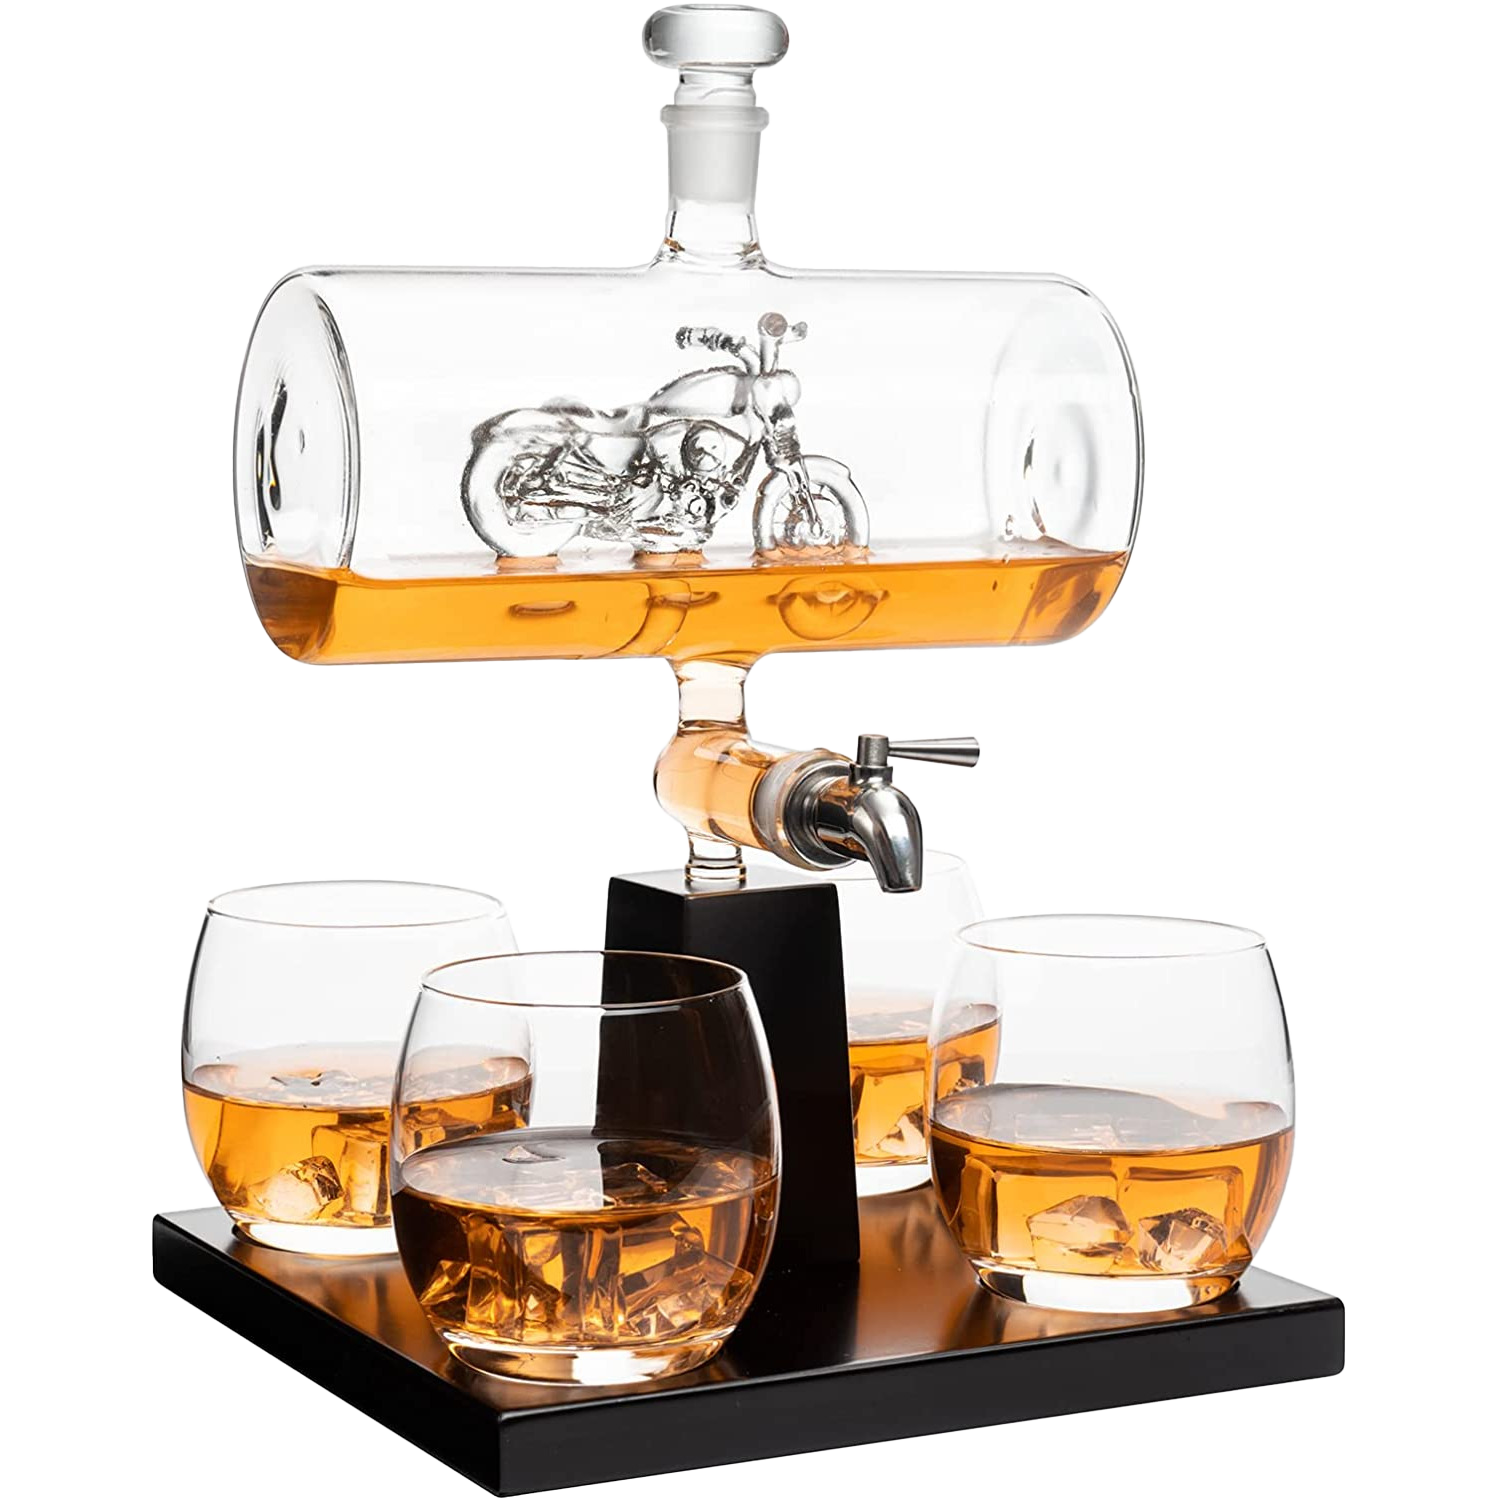 Motorcycle Decanter Whiskey & Wine Decanter Set 1100ml by The Wine Savant with 4 Whiskey Glasses, Motorcycle Gifts, Harley Davidson Motorbike Gifts, Drink Dispenser for Wine, Scotch, Bourbon 19"H 8"W-0